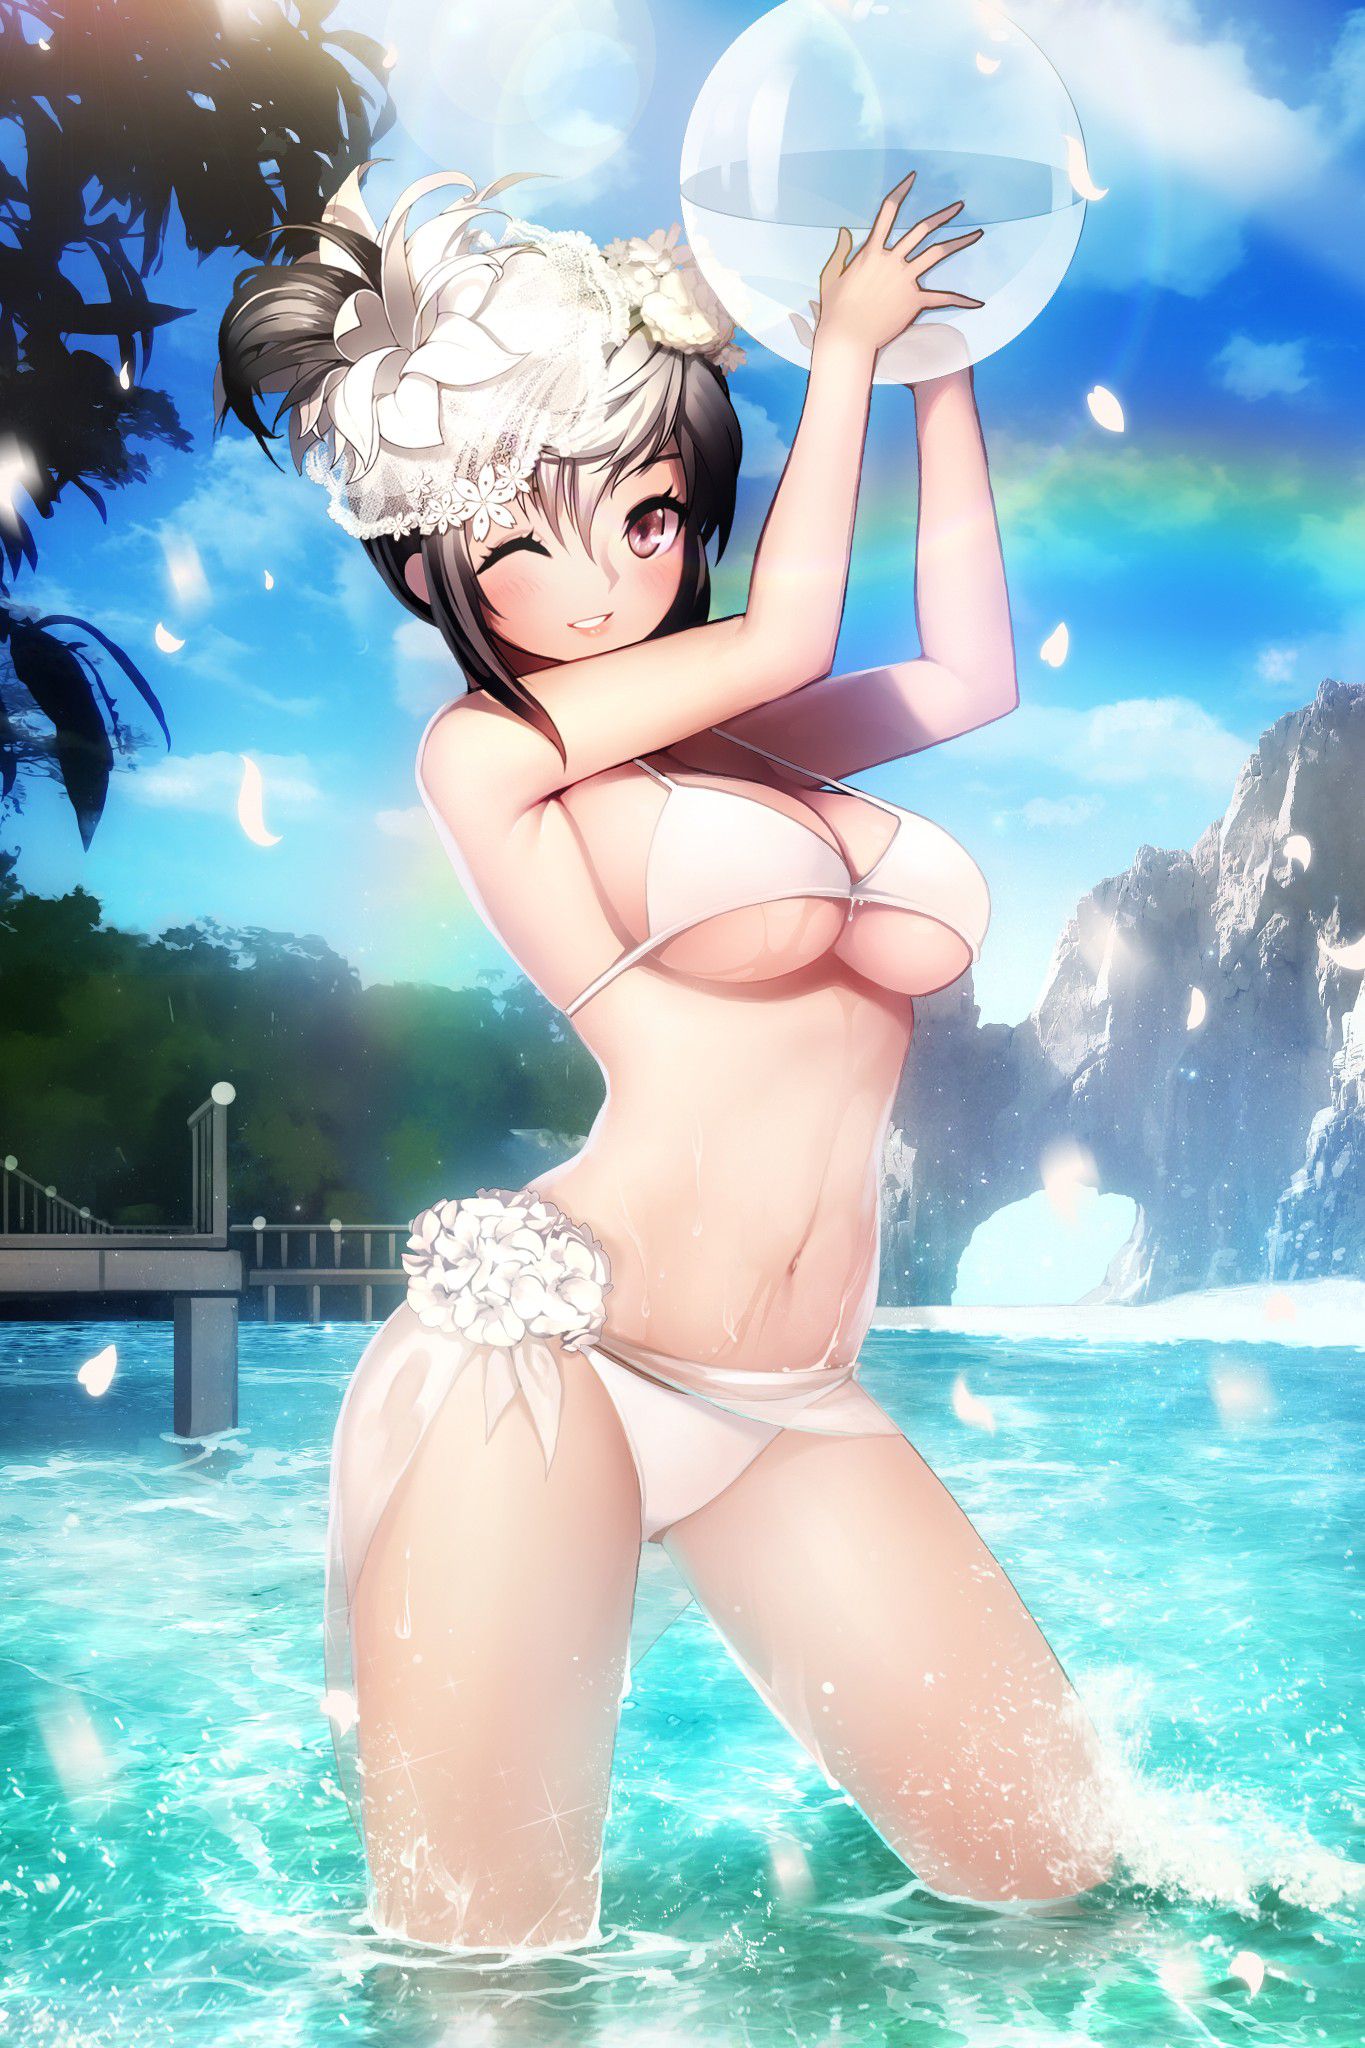 I want to see a swimsuit image. 4